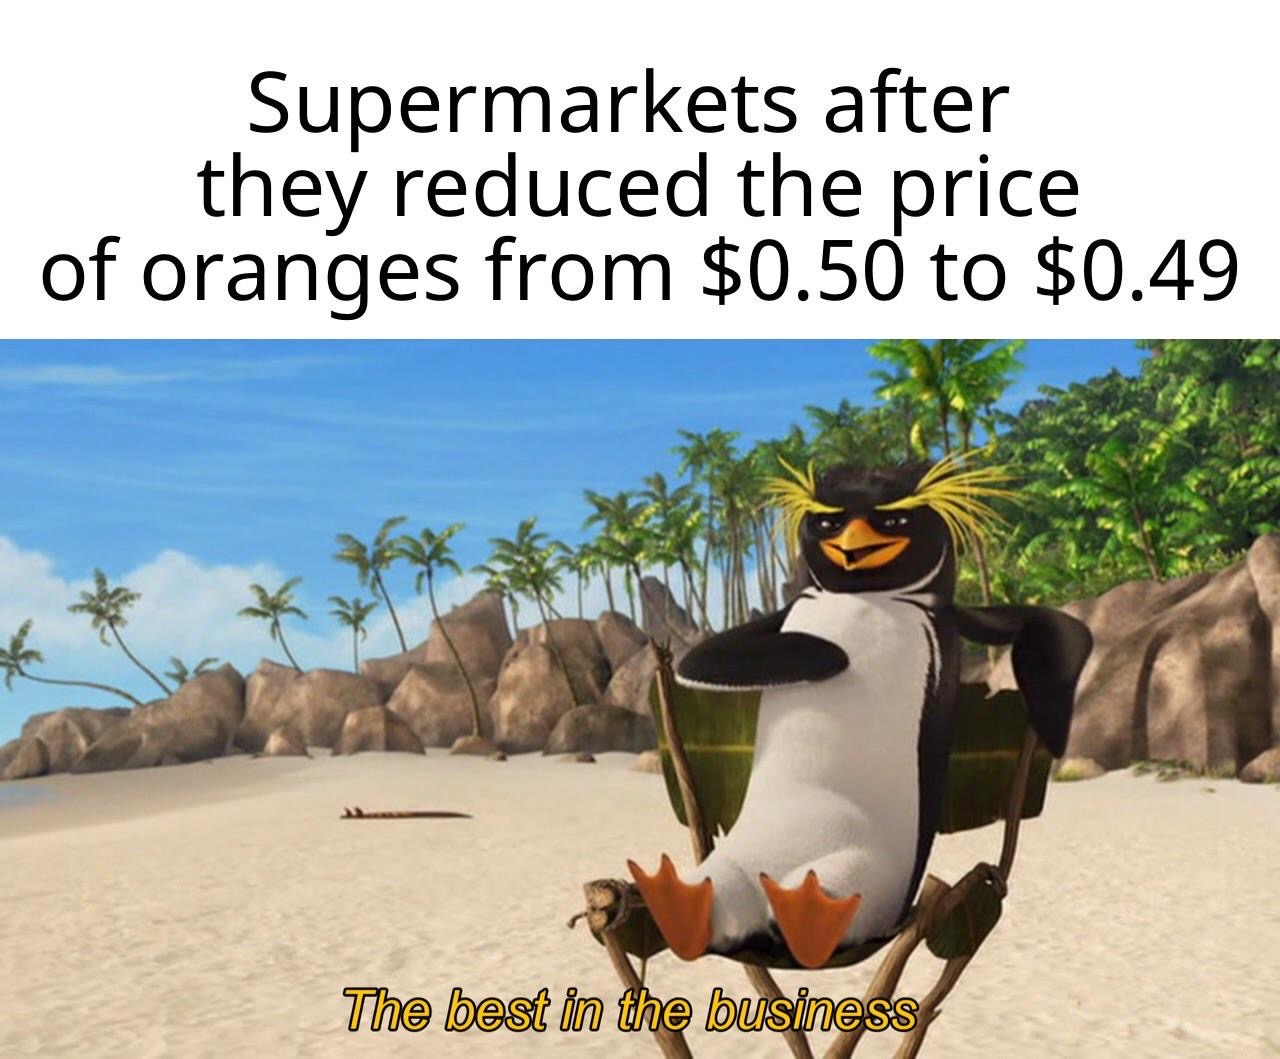 dank memes dank meme - fauna - Supermarkets after they reduced the price of oranges from $0.50 to $0.49 The best in the business